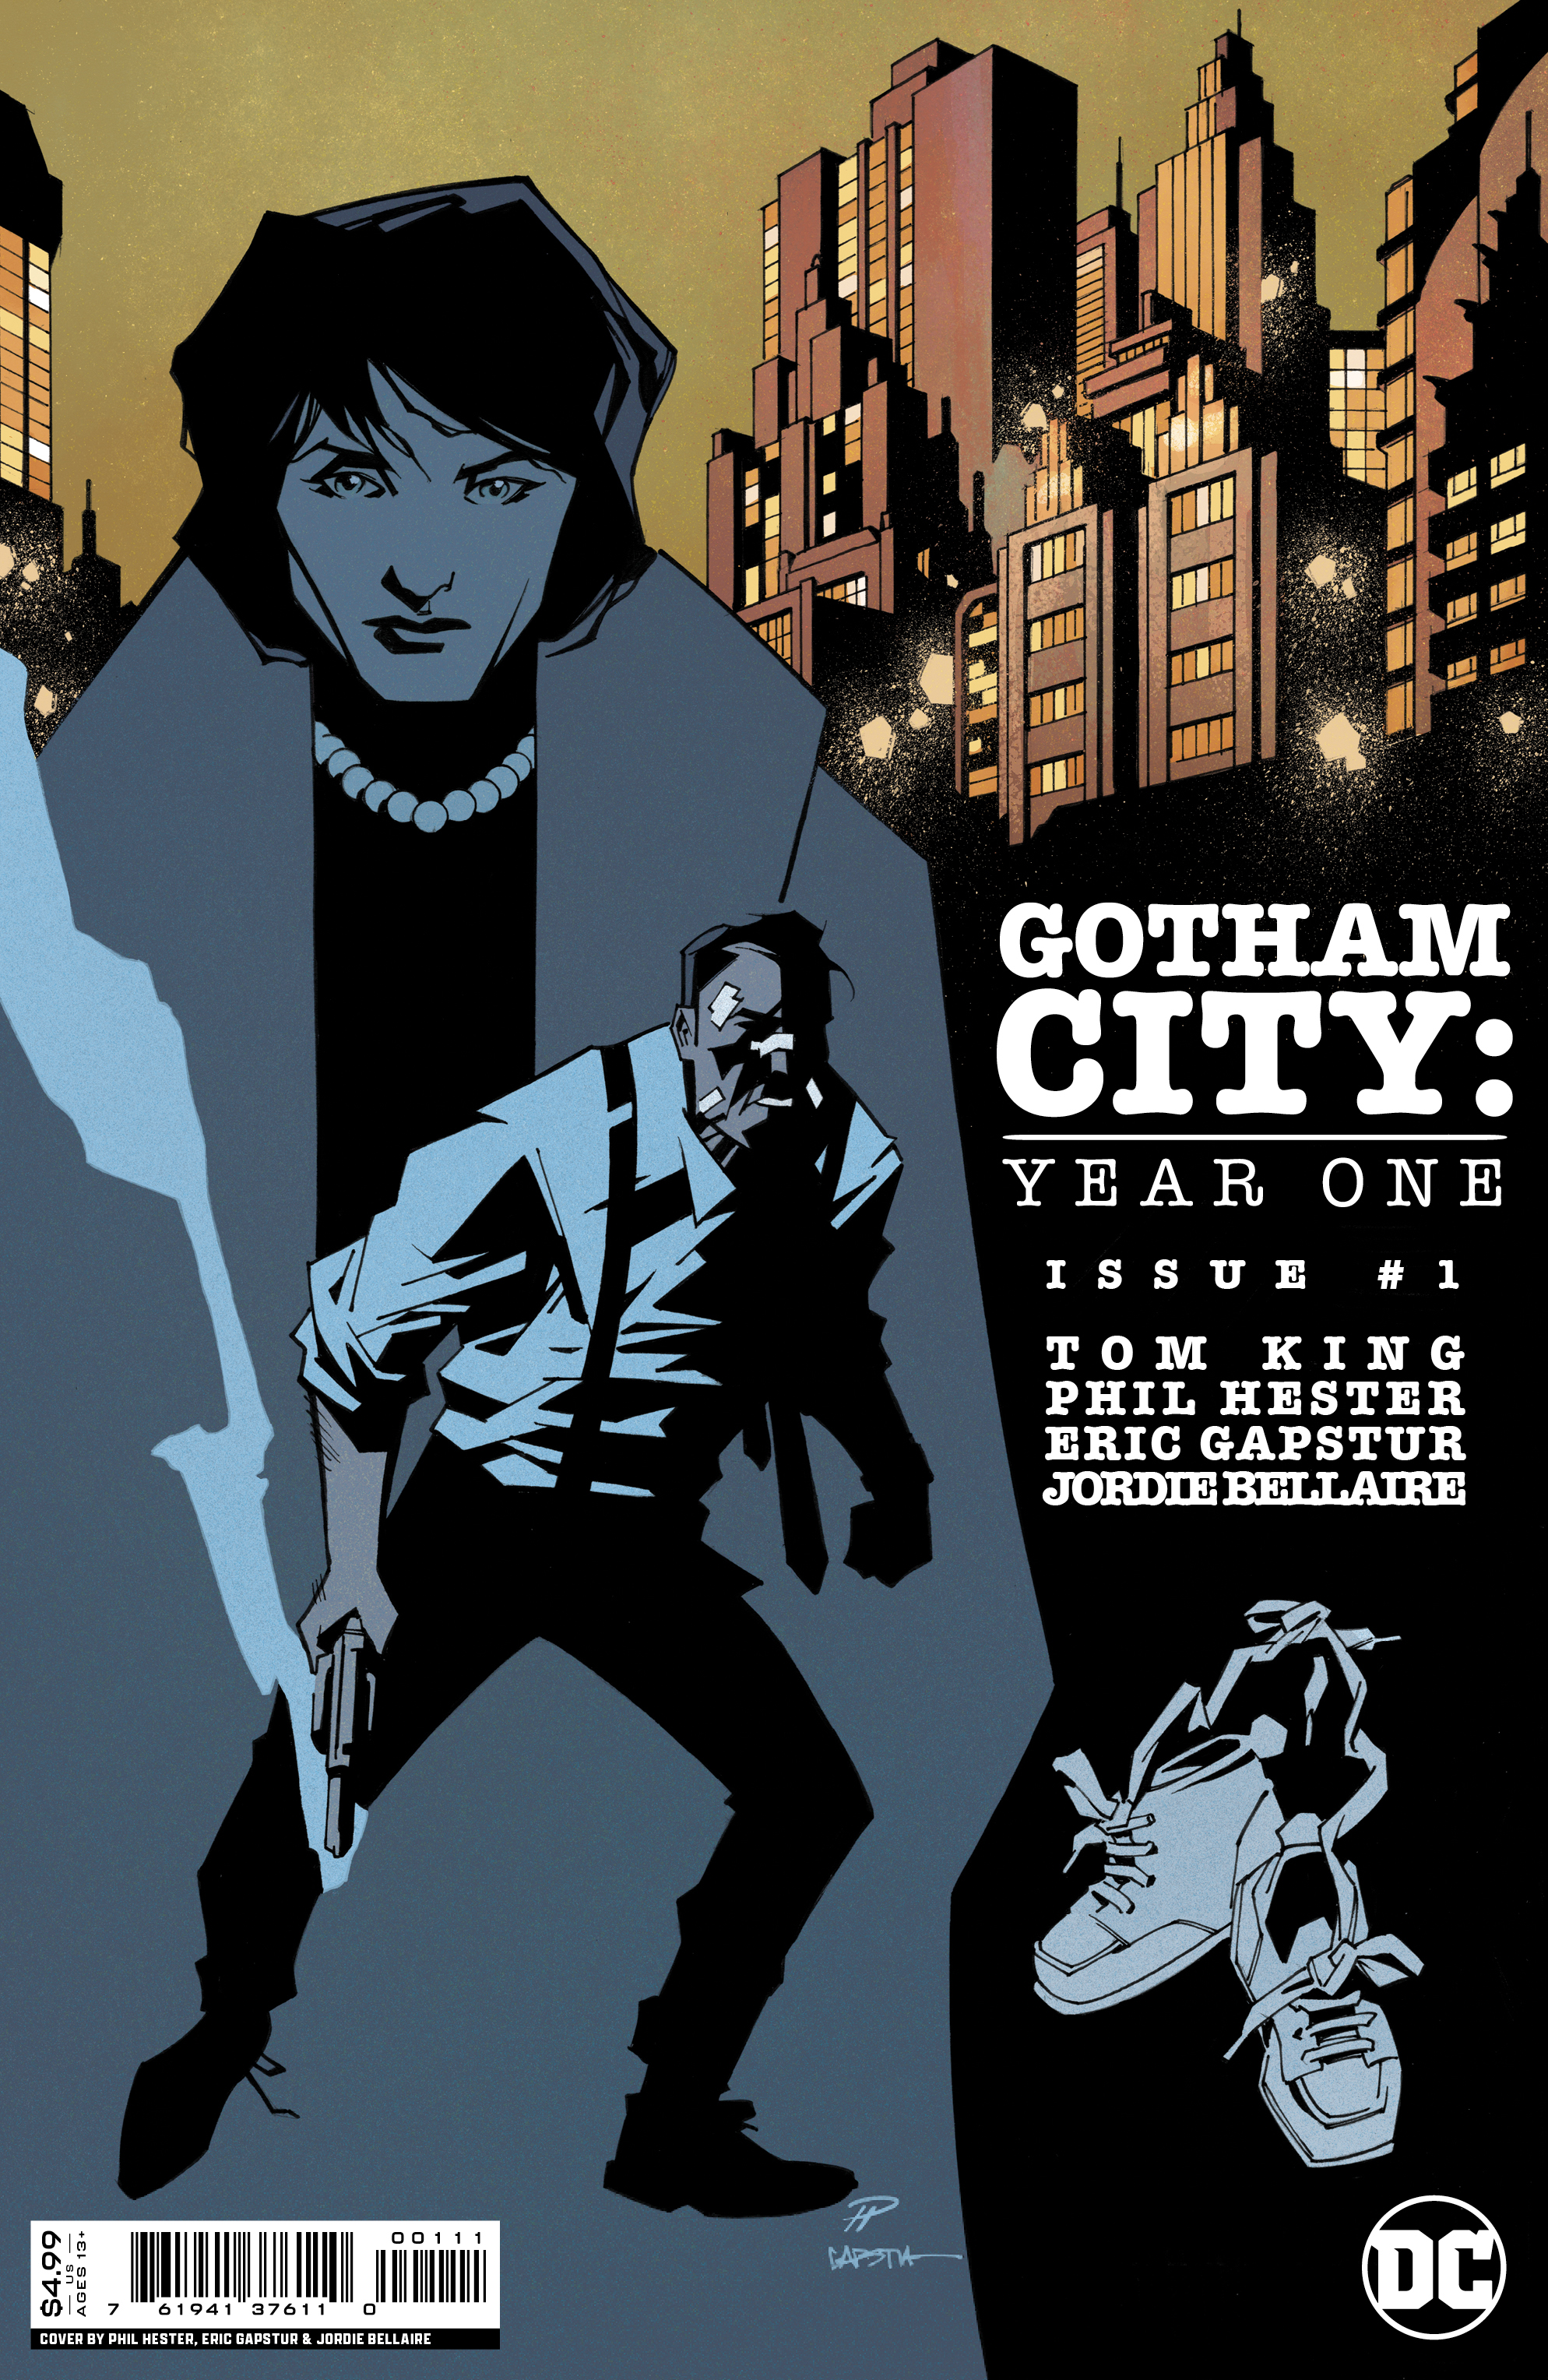 Gotham City Year One #1 Cover A Phil Hester & Eric Gapstur (Of 6)